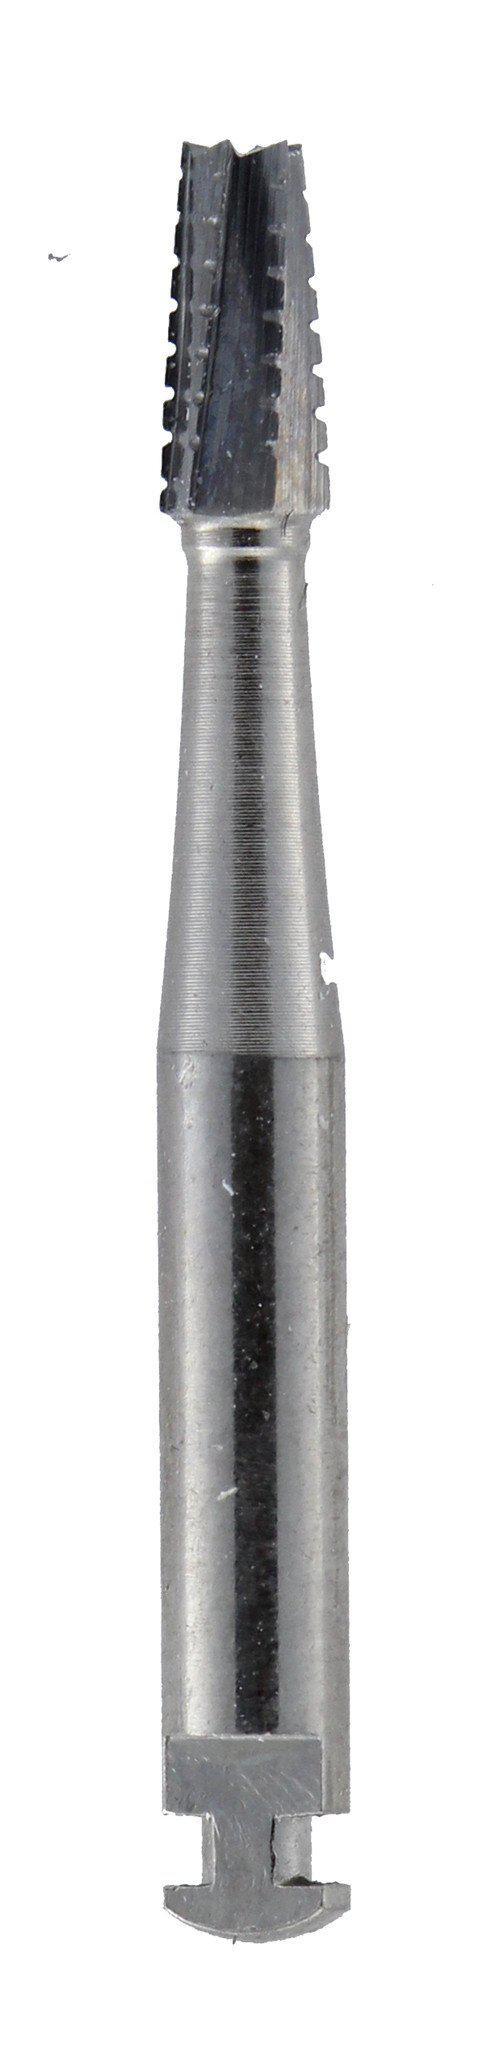 RA703 Dentalree LATCH (Right Angle) Premium Carbide Burs - Midwest Type Made in Canada